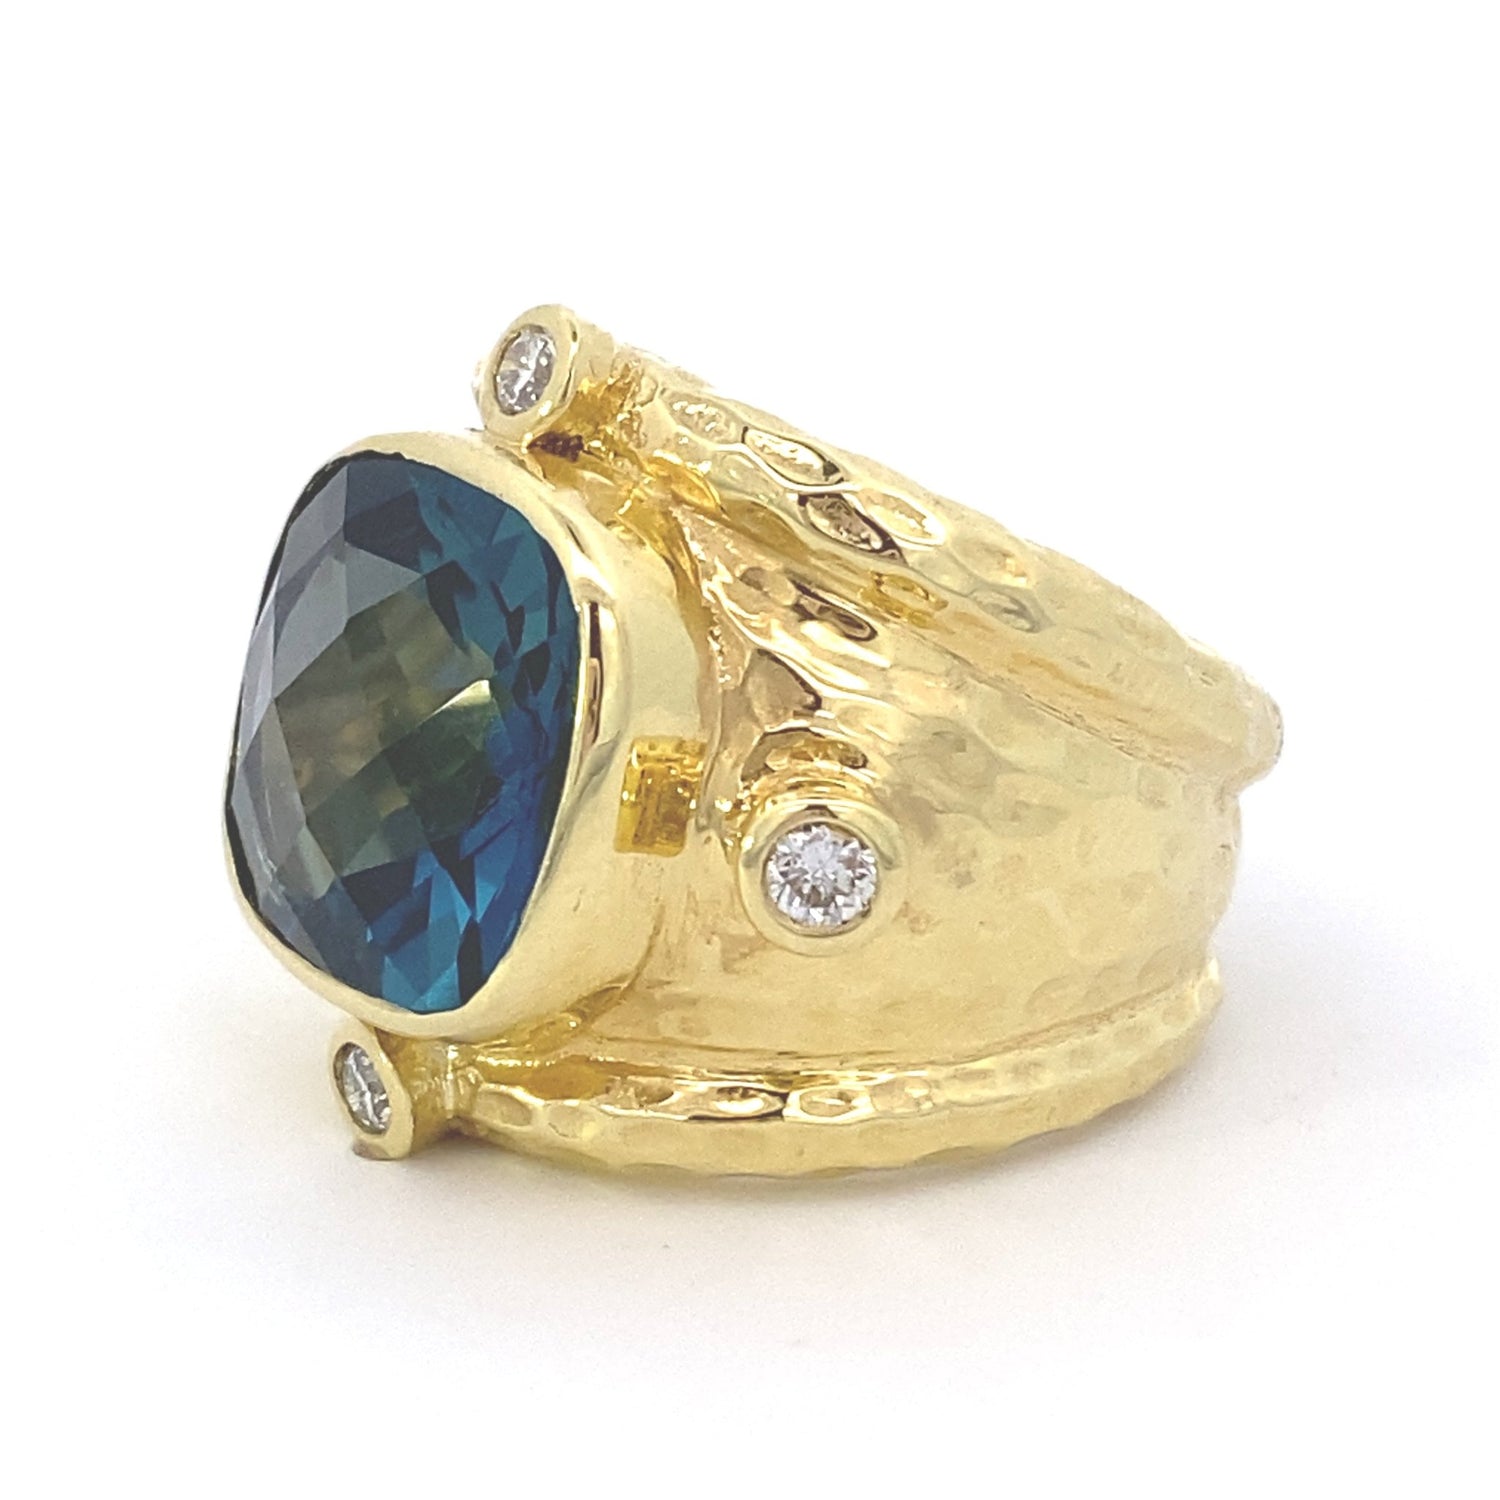 Ring-14kt Hammered Yellow Gold w/ Large Cushion London Blue with diamond accents at NSEW - Gaines Jewelers